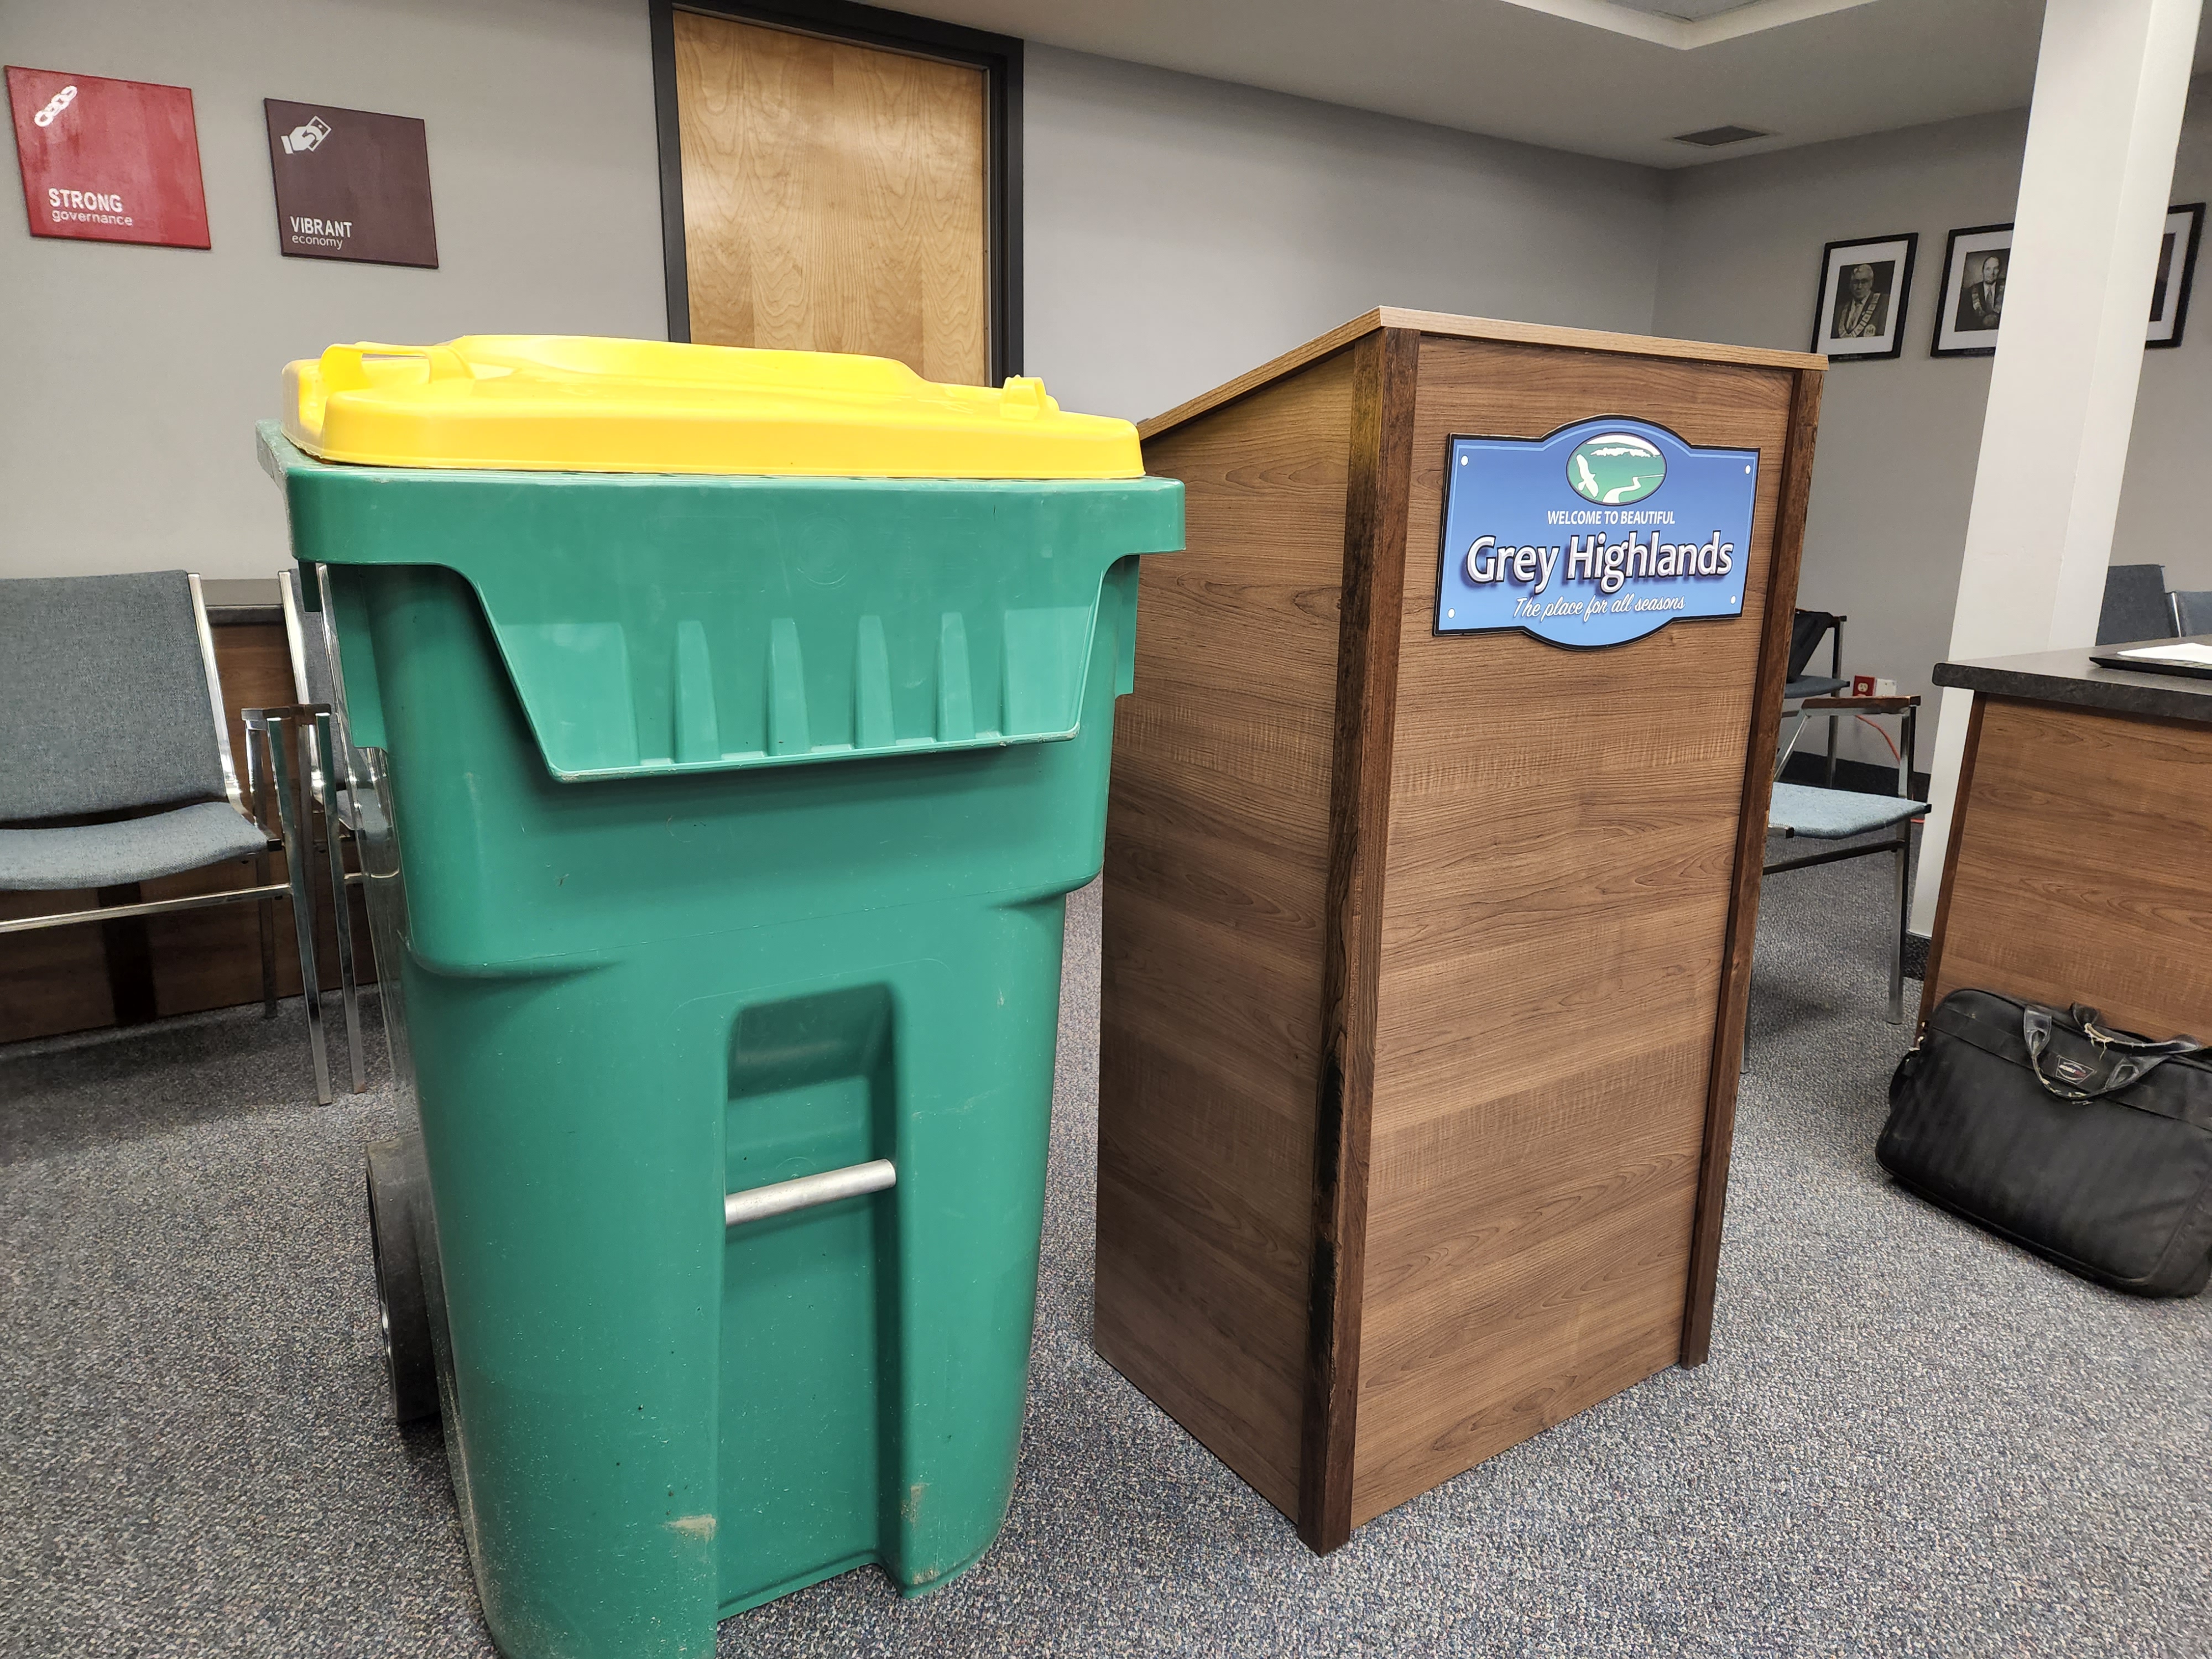 Grey Highlands moving to big bins for waste/recycling collection